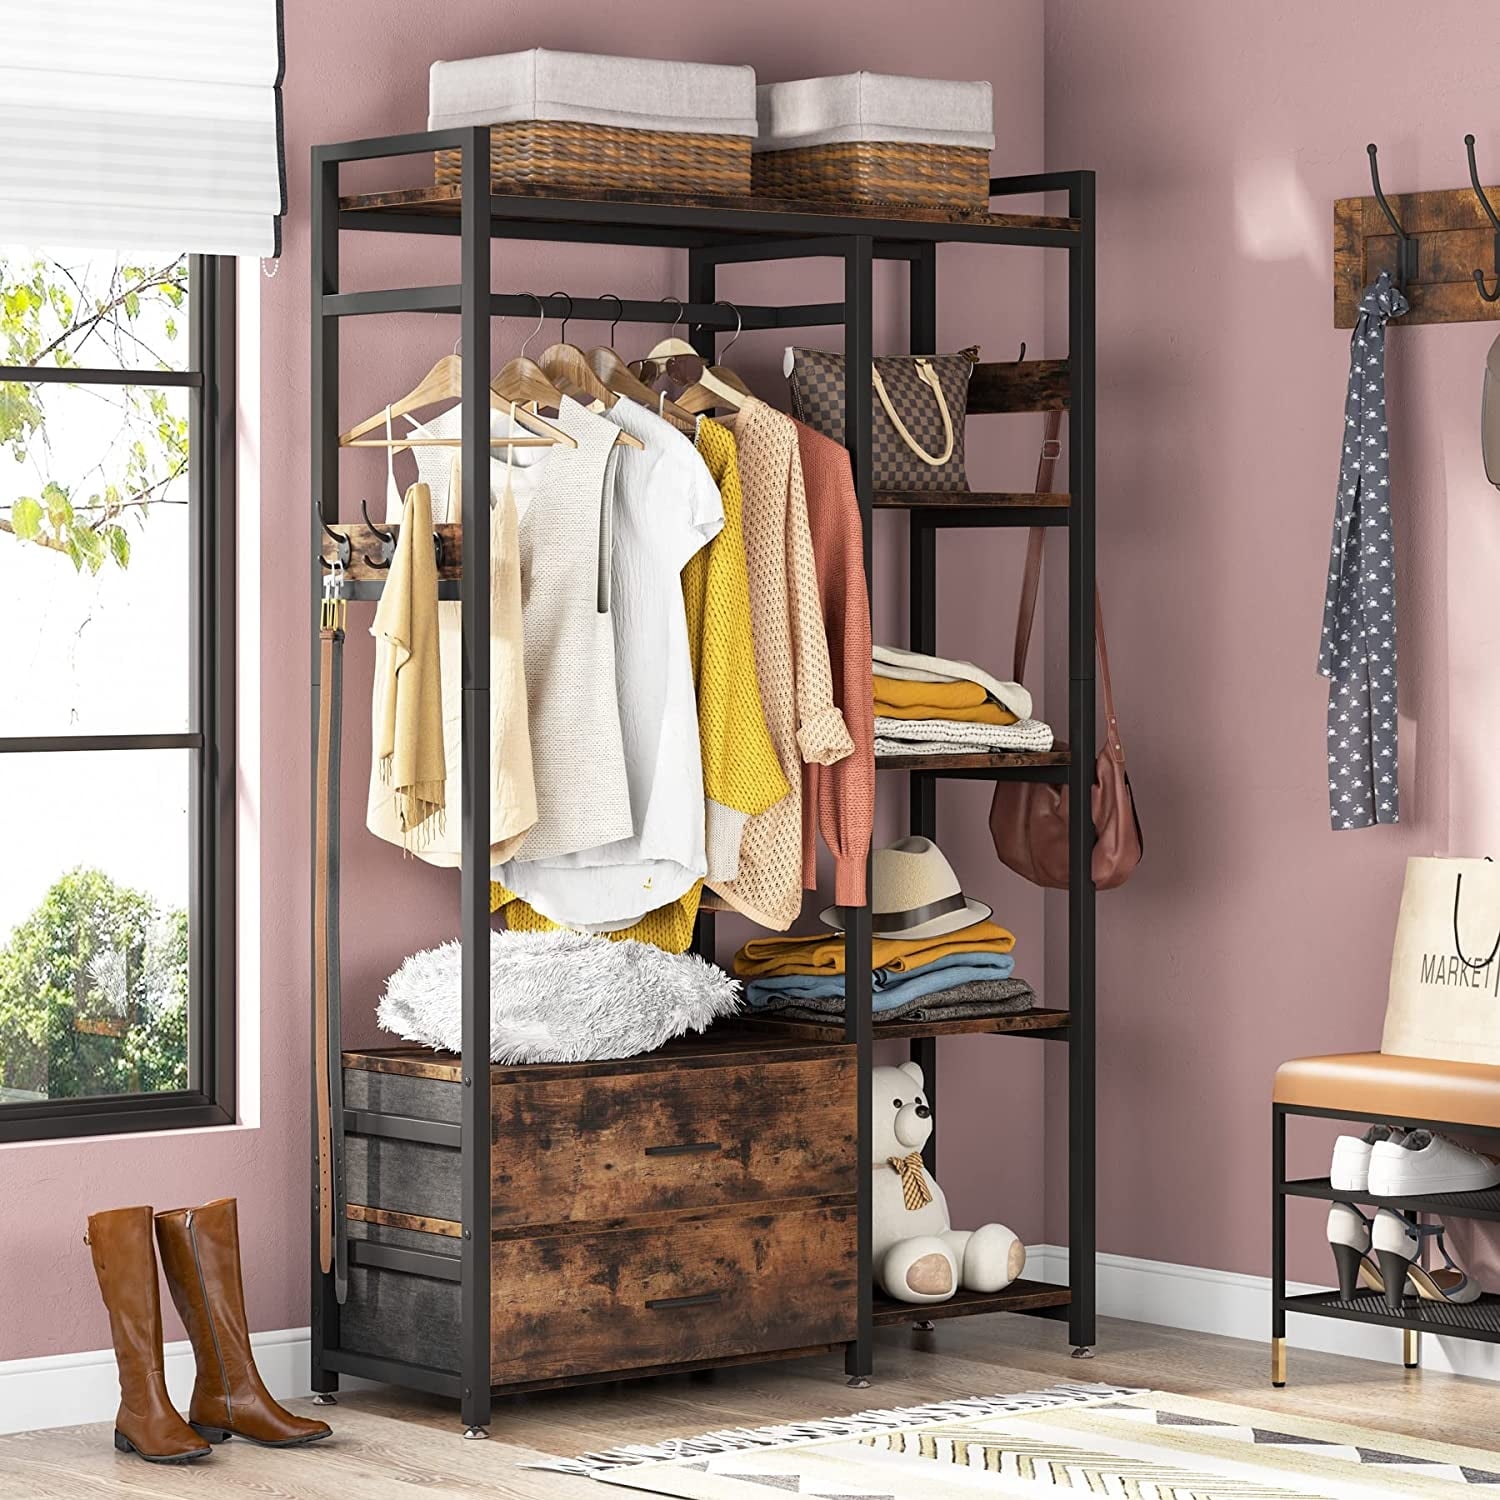 https://ak1.ostkcdn.com/images/products/is/images/direct/ee22d3ac786532260c82feadcf1ce9659a98c98a/Closet-Organizer%2C-Freestanding-Clothes-Rack-with-Shelves%2C-Heavy-Duty-Garment-Rack.jpg